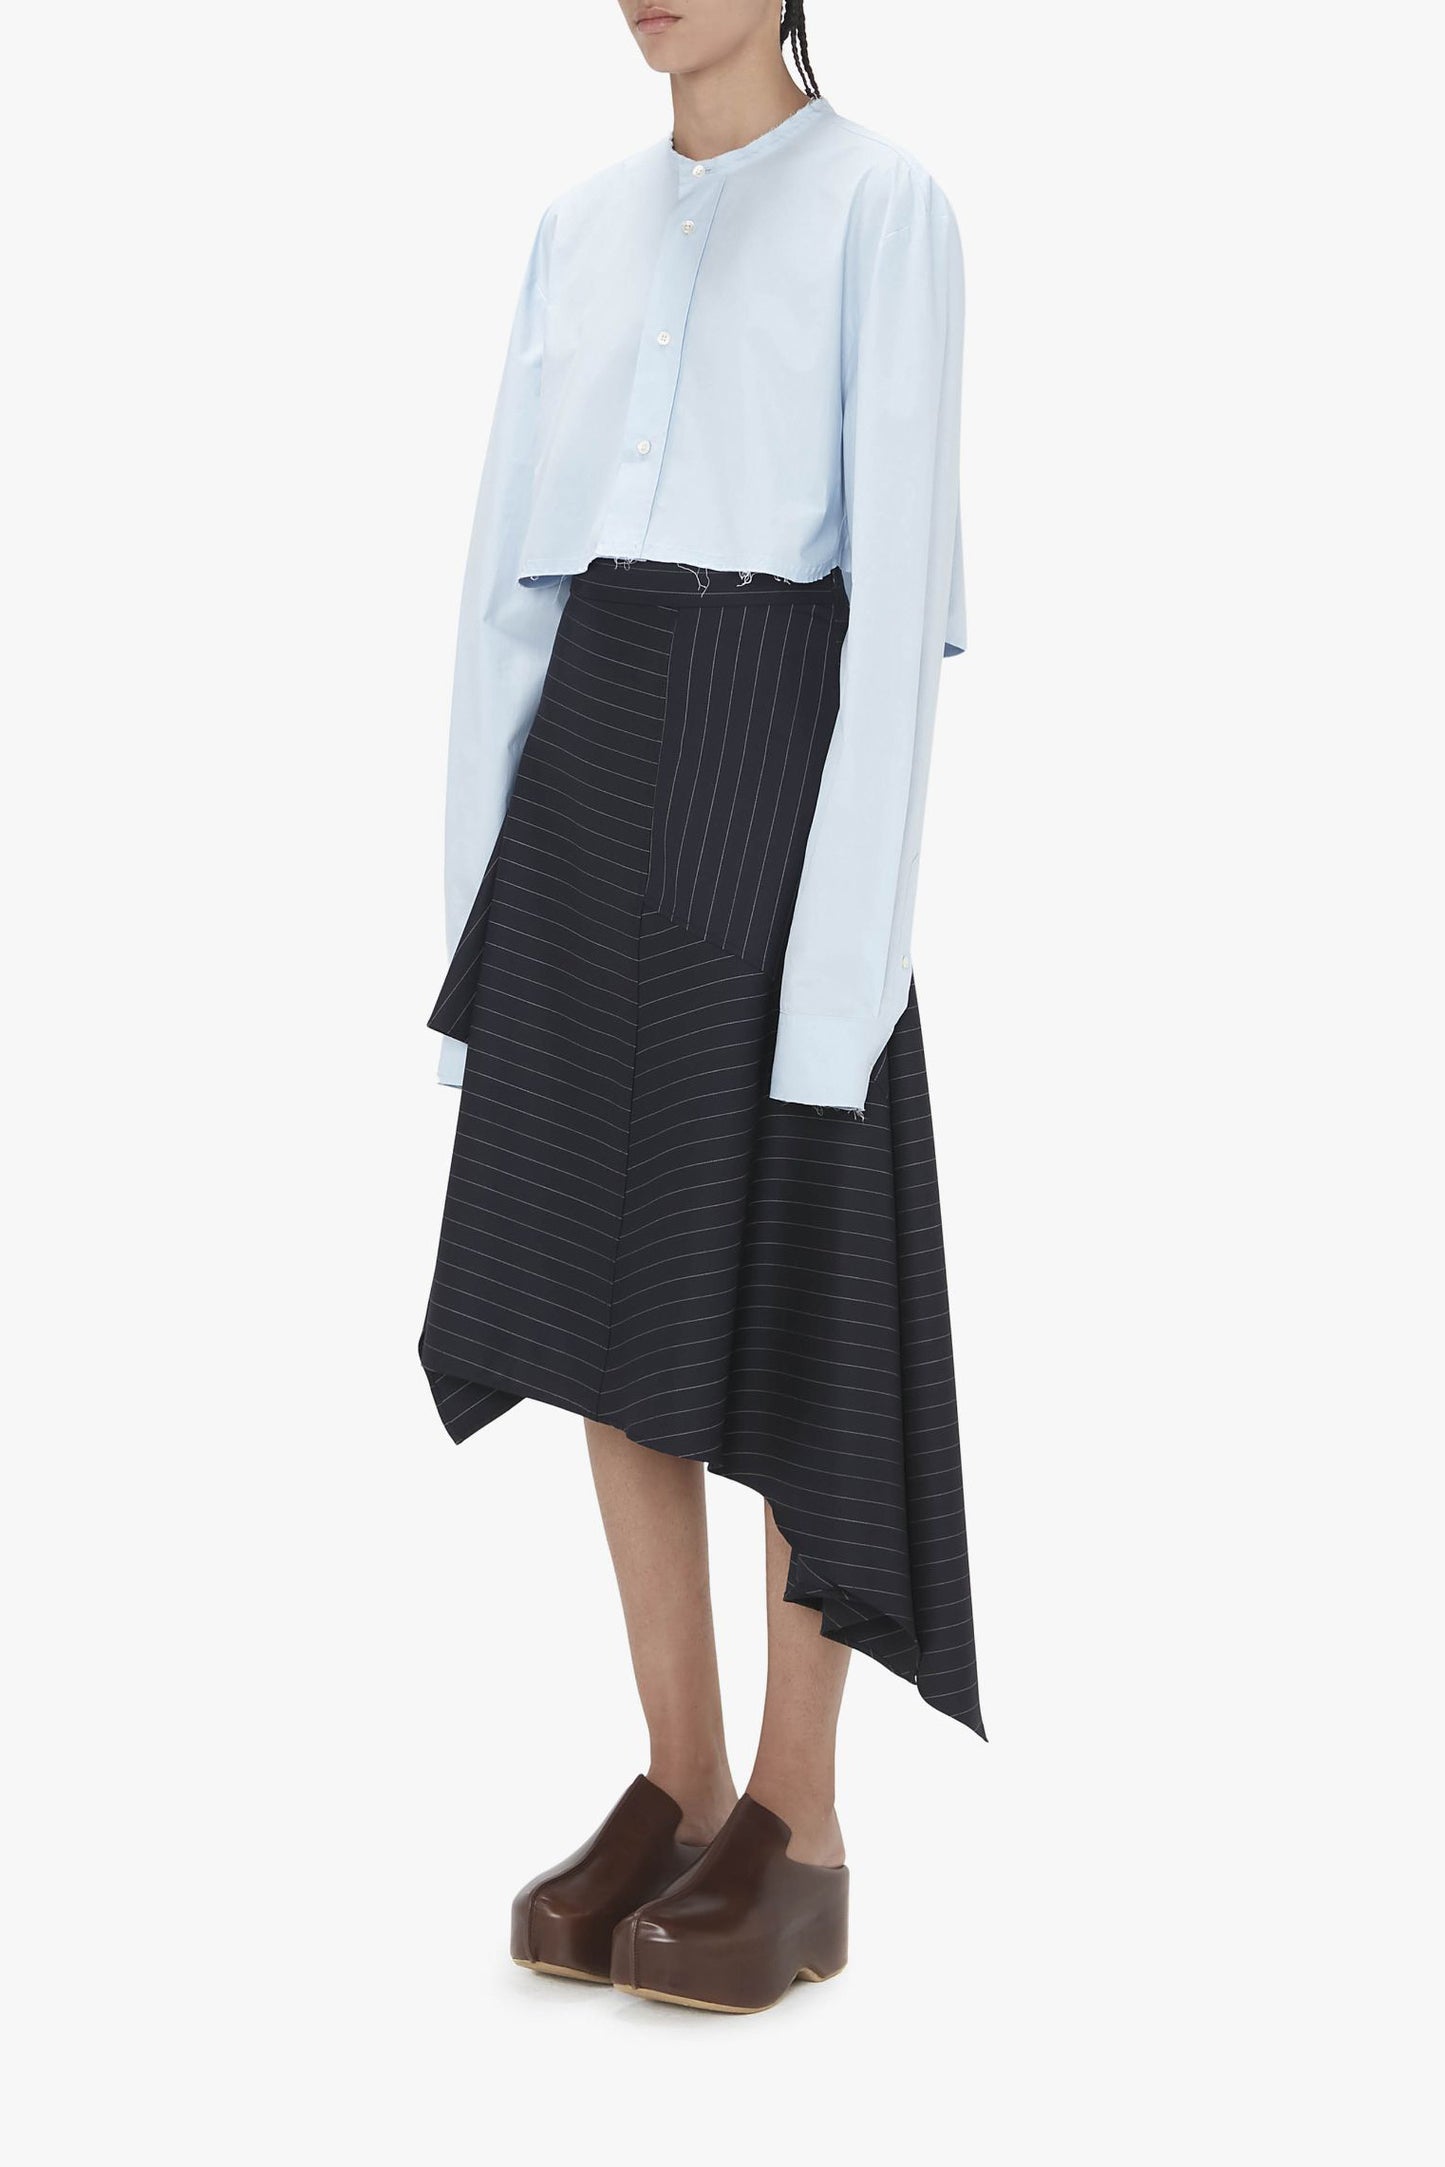 Bluse Raw Cropped in BlauJW Anderson - Anita Hass